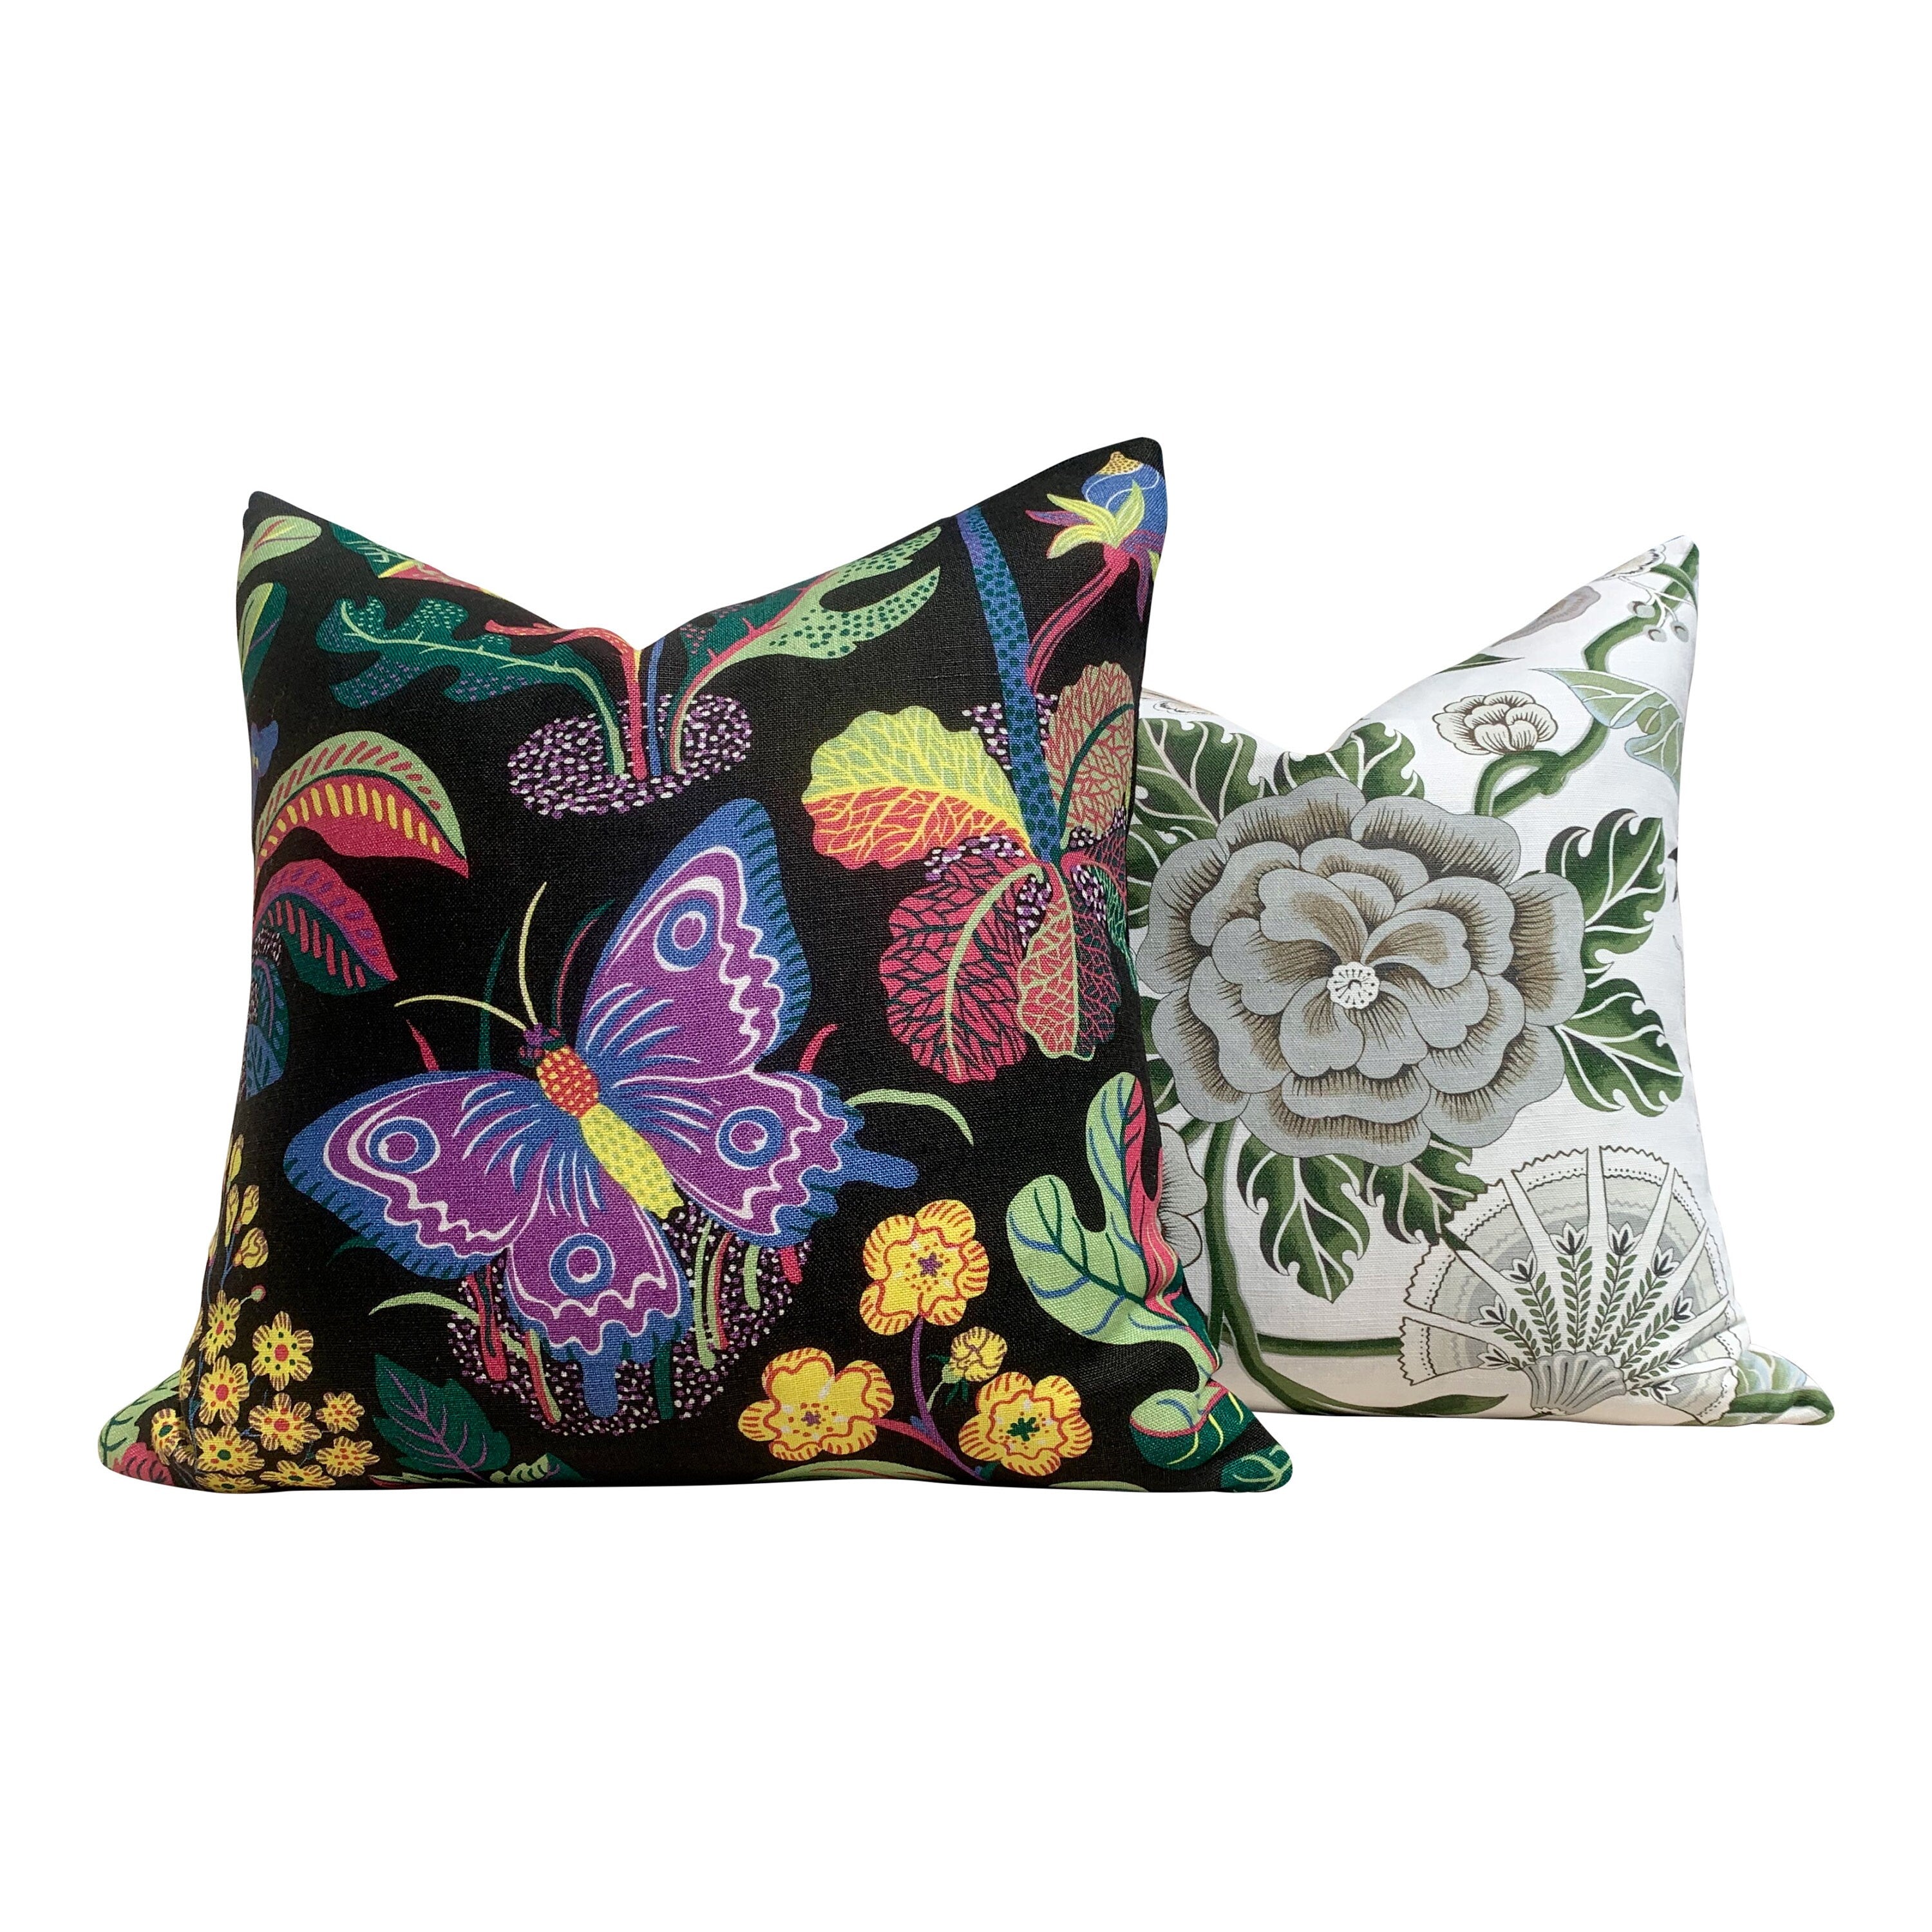 Schumacher Magical Garden Pillow in Purple and Black. Accent Lumbar Pillow in Black and Lilac.